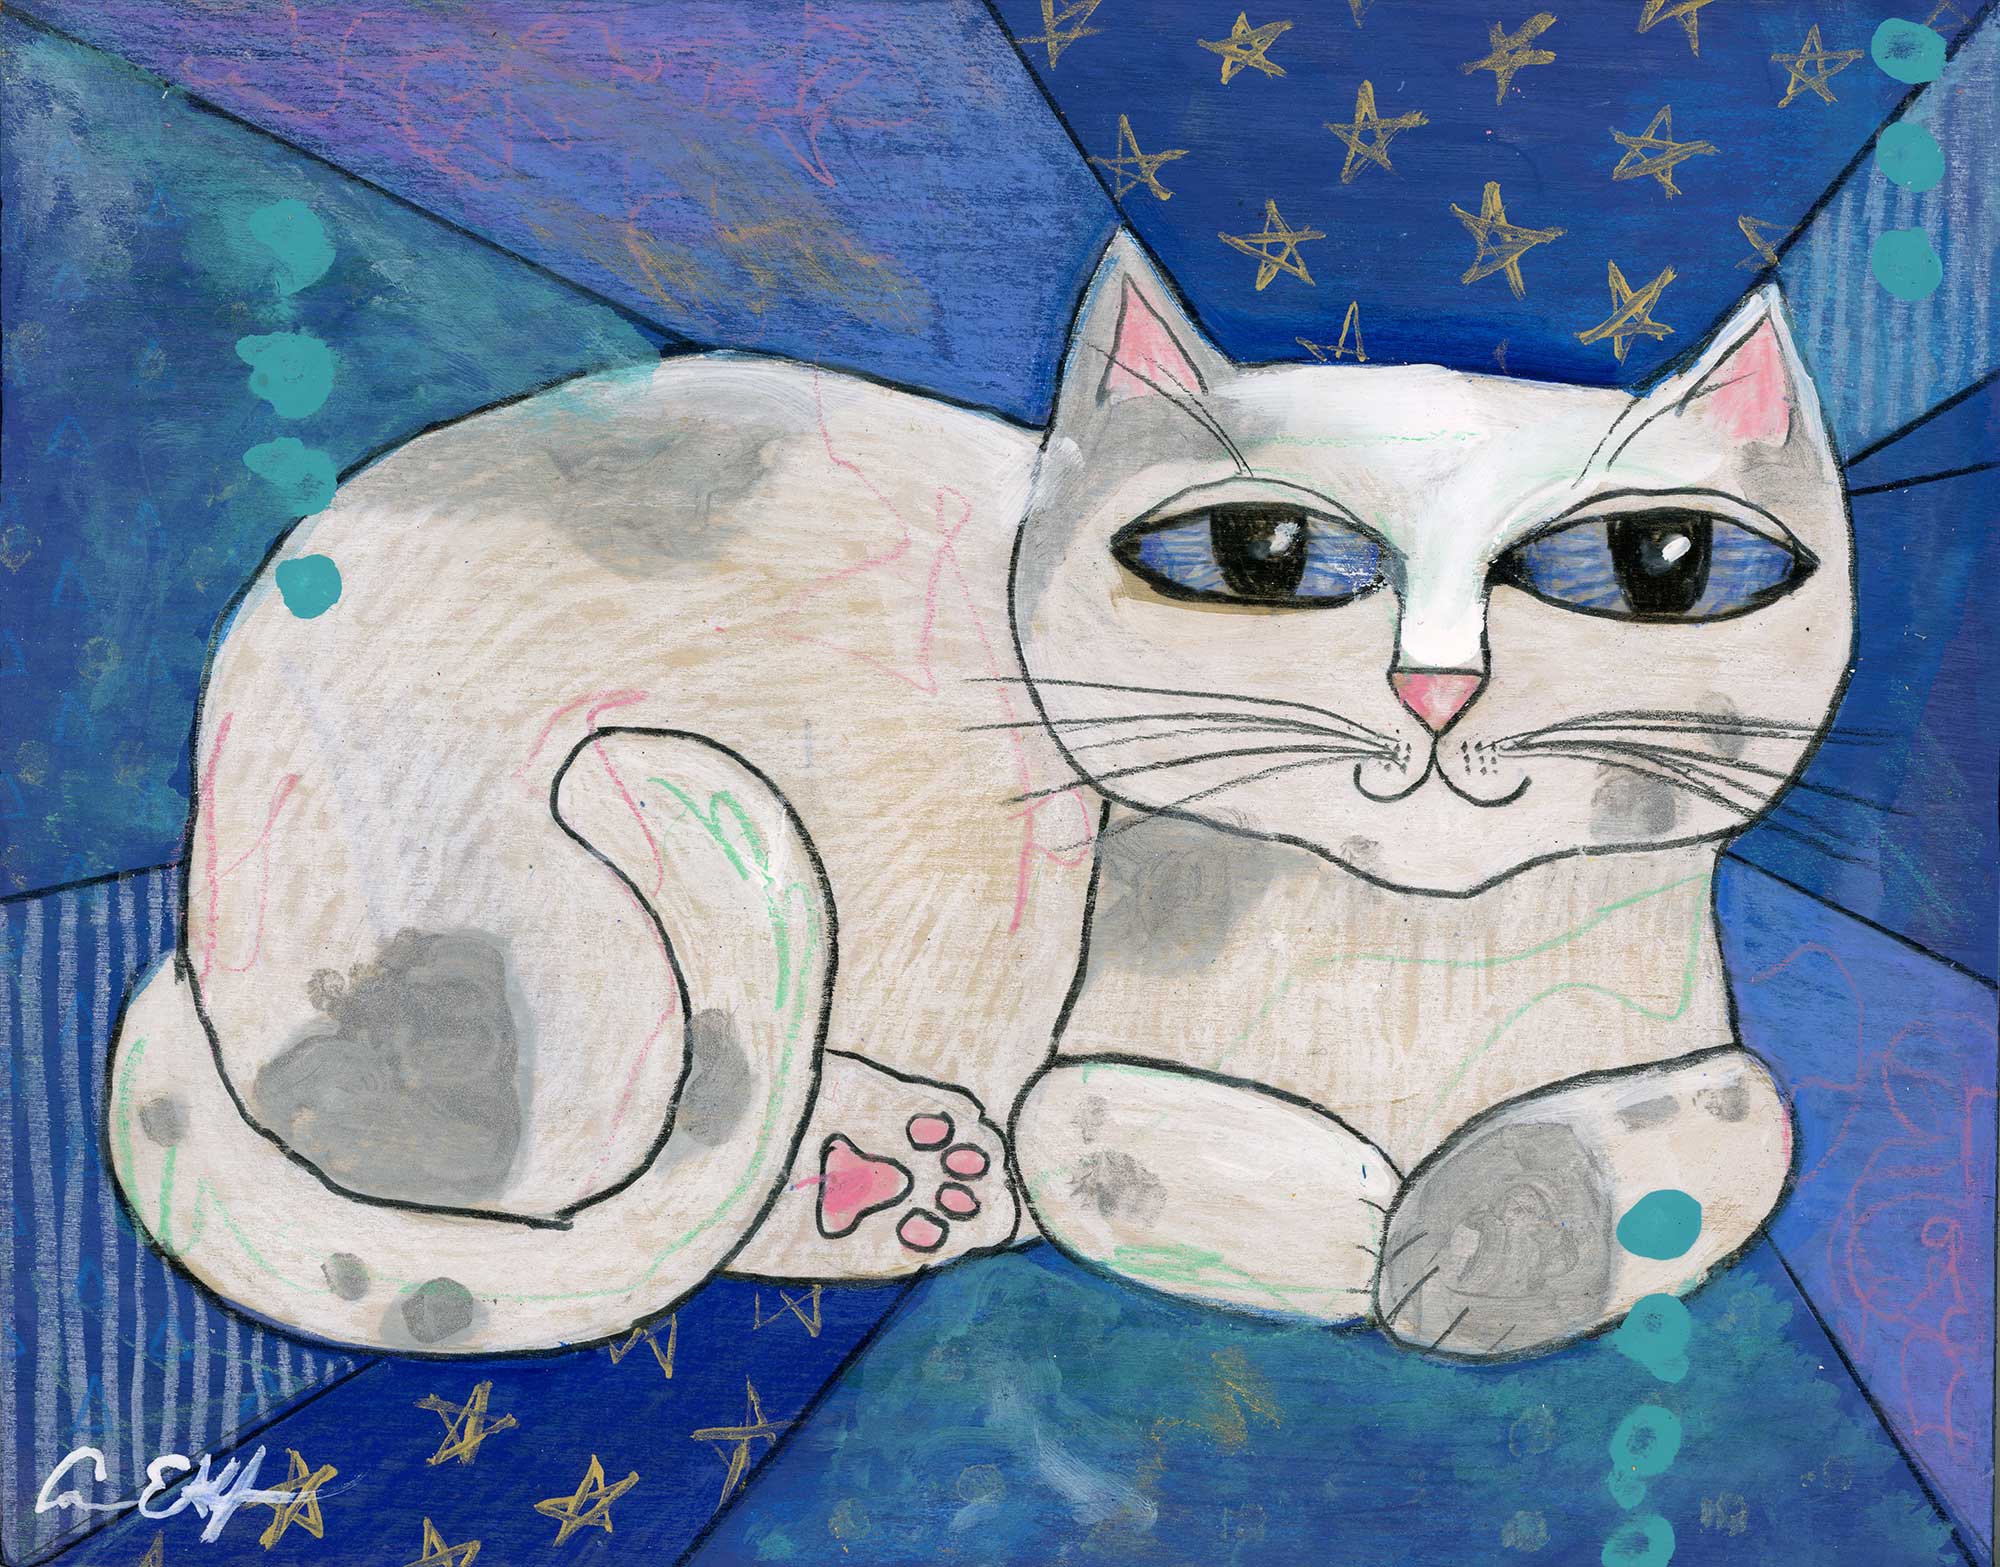 SOLD - "Mod Cat on Blue", 8" x 10", mixed media